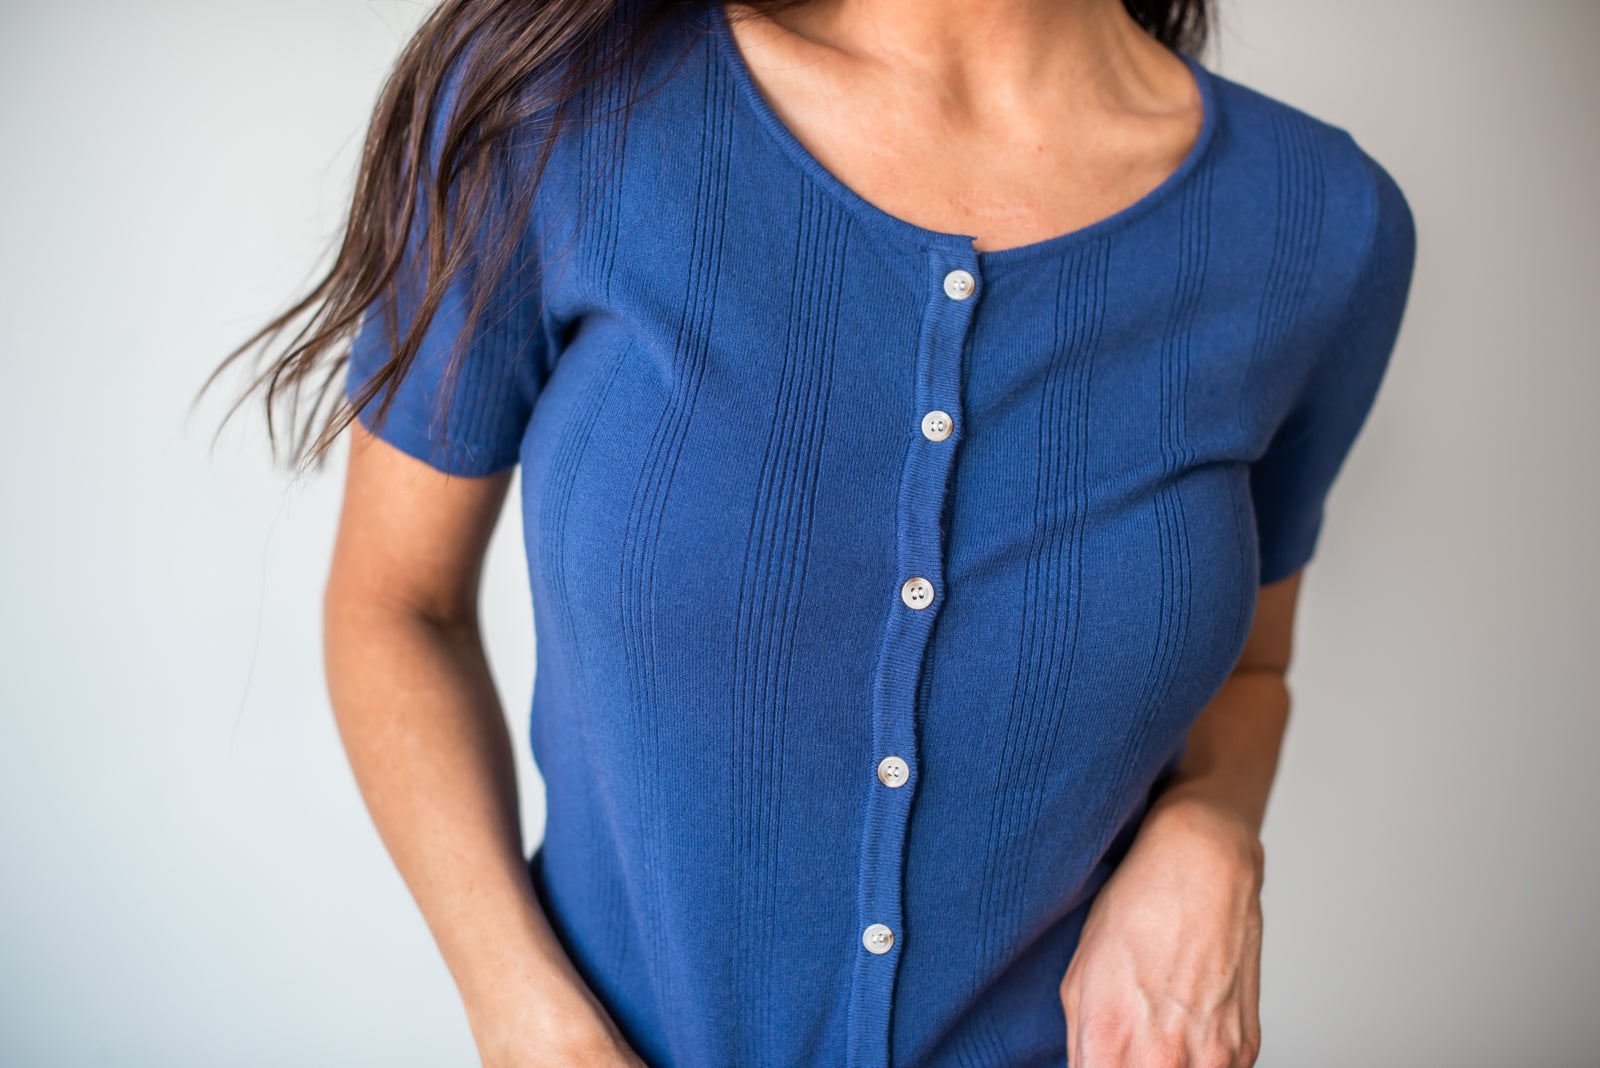 Stay Together Ribbed Top